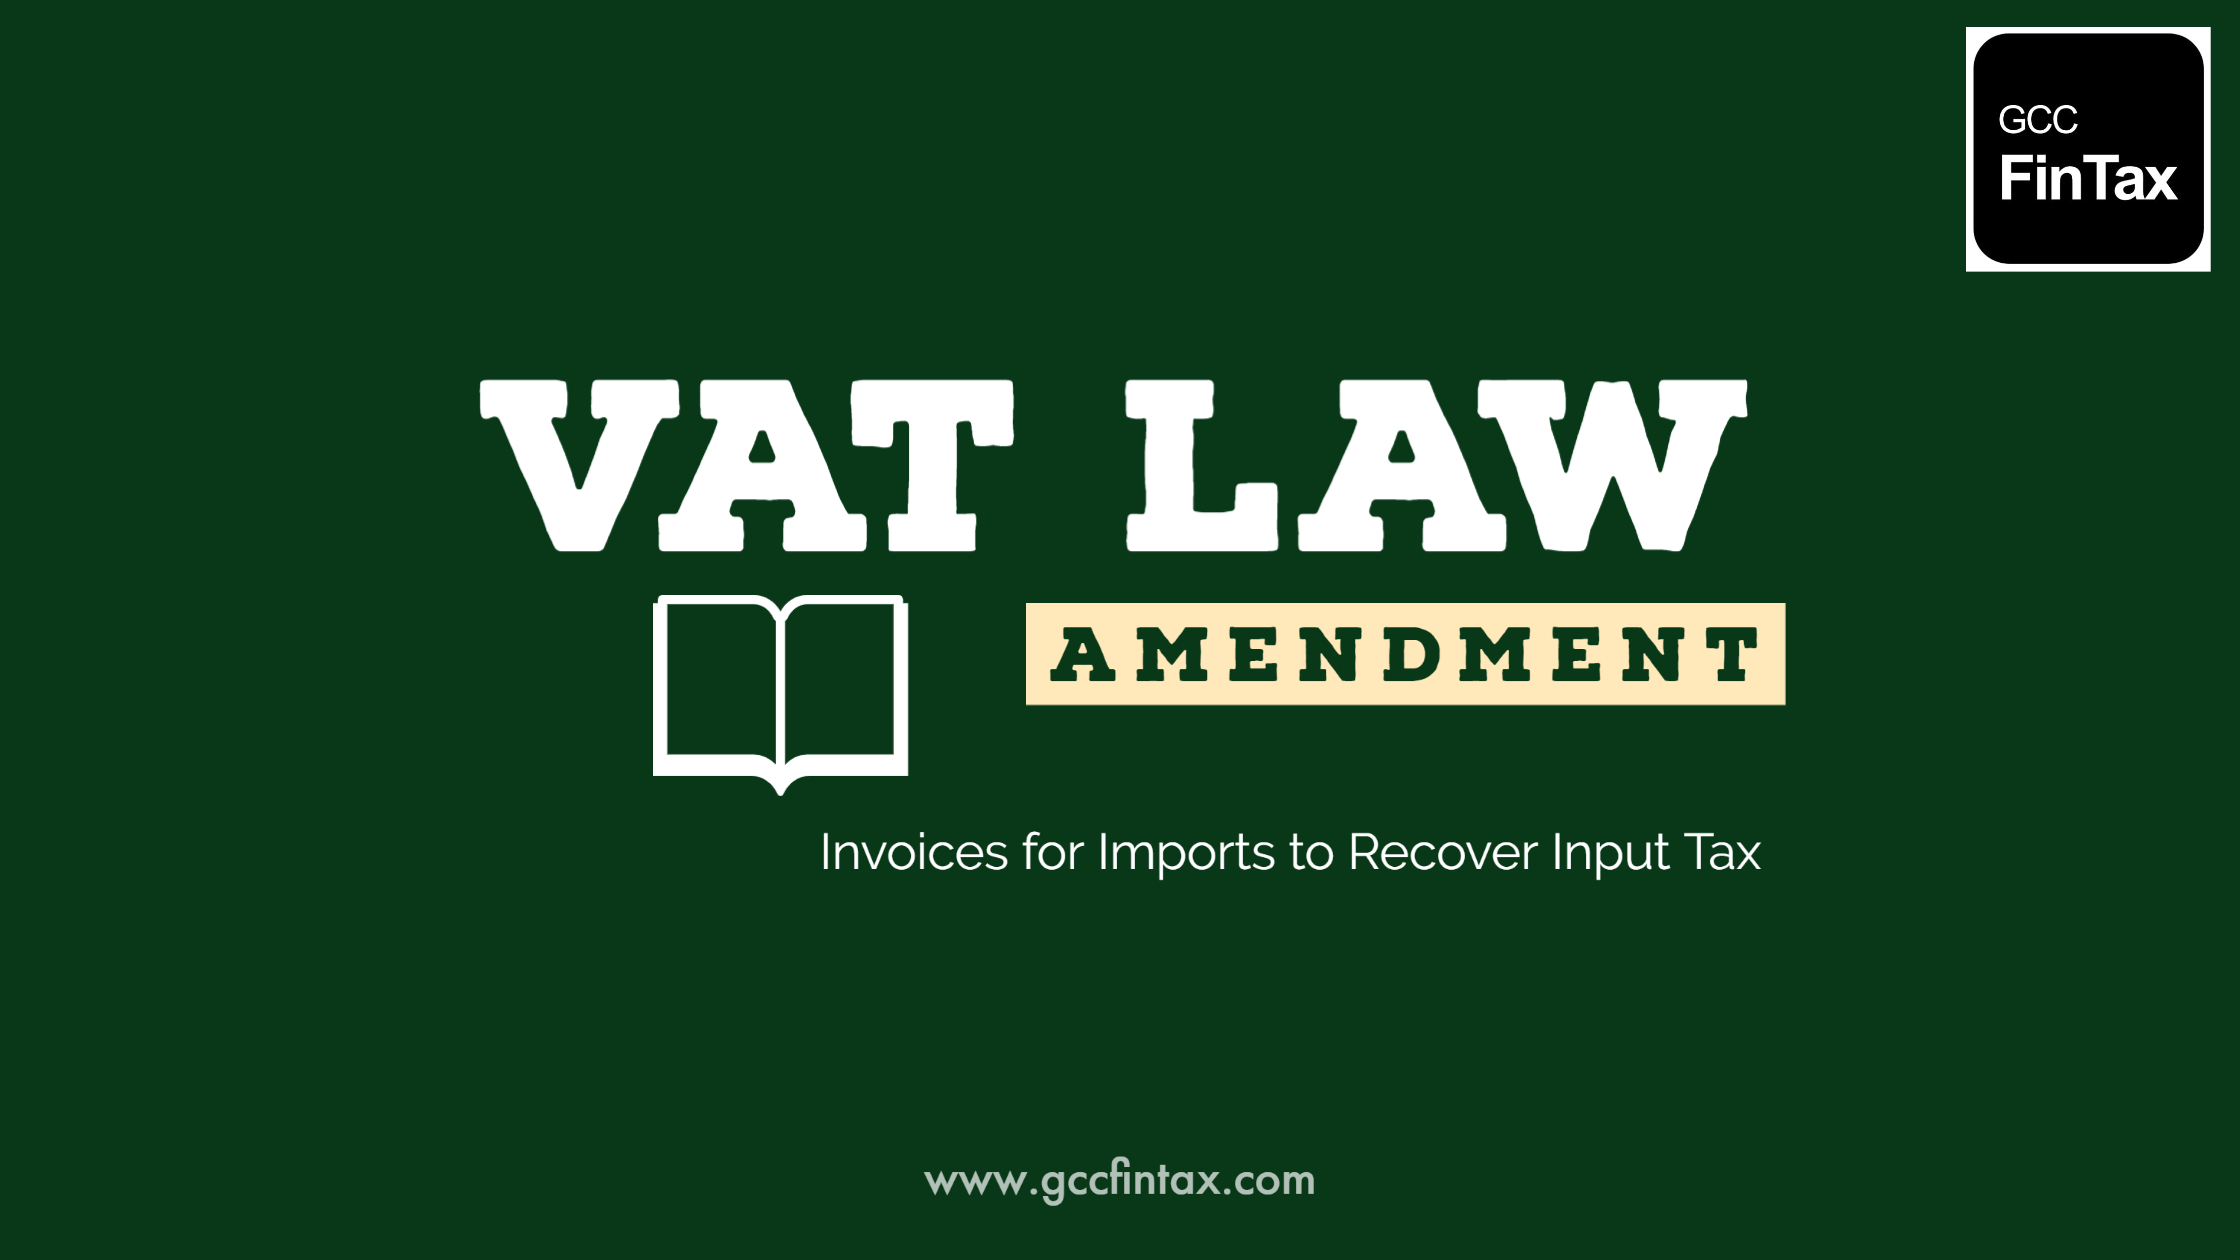 UAE VAT Law Amendment Requires Invoices for Imports to Recover Input Tax